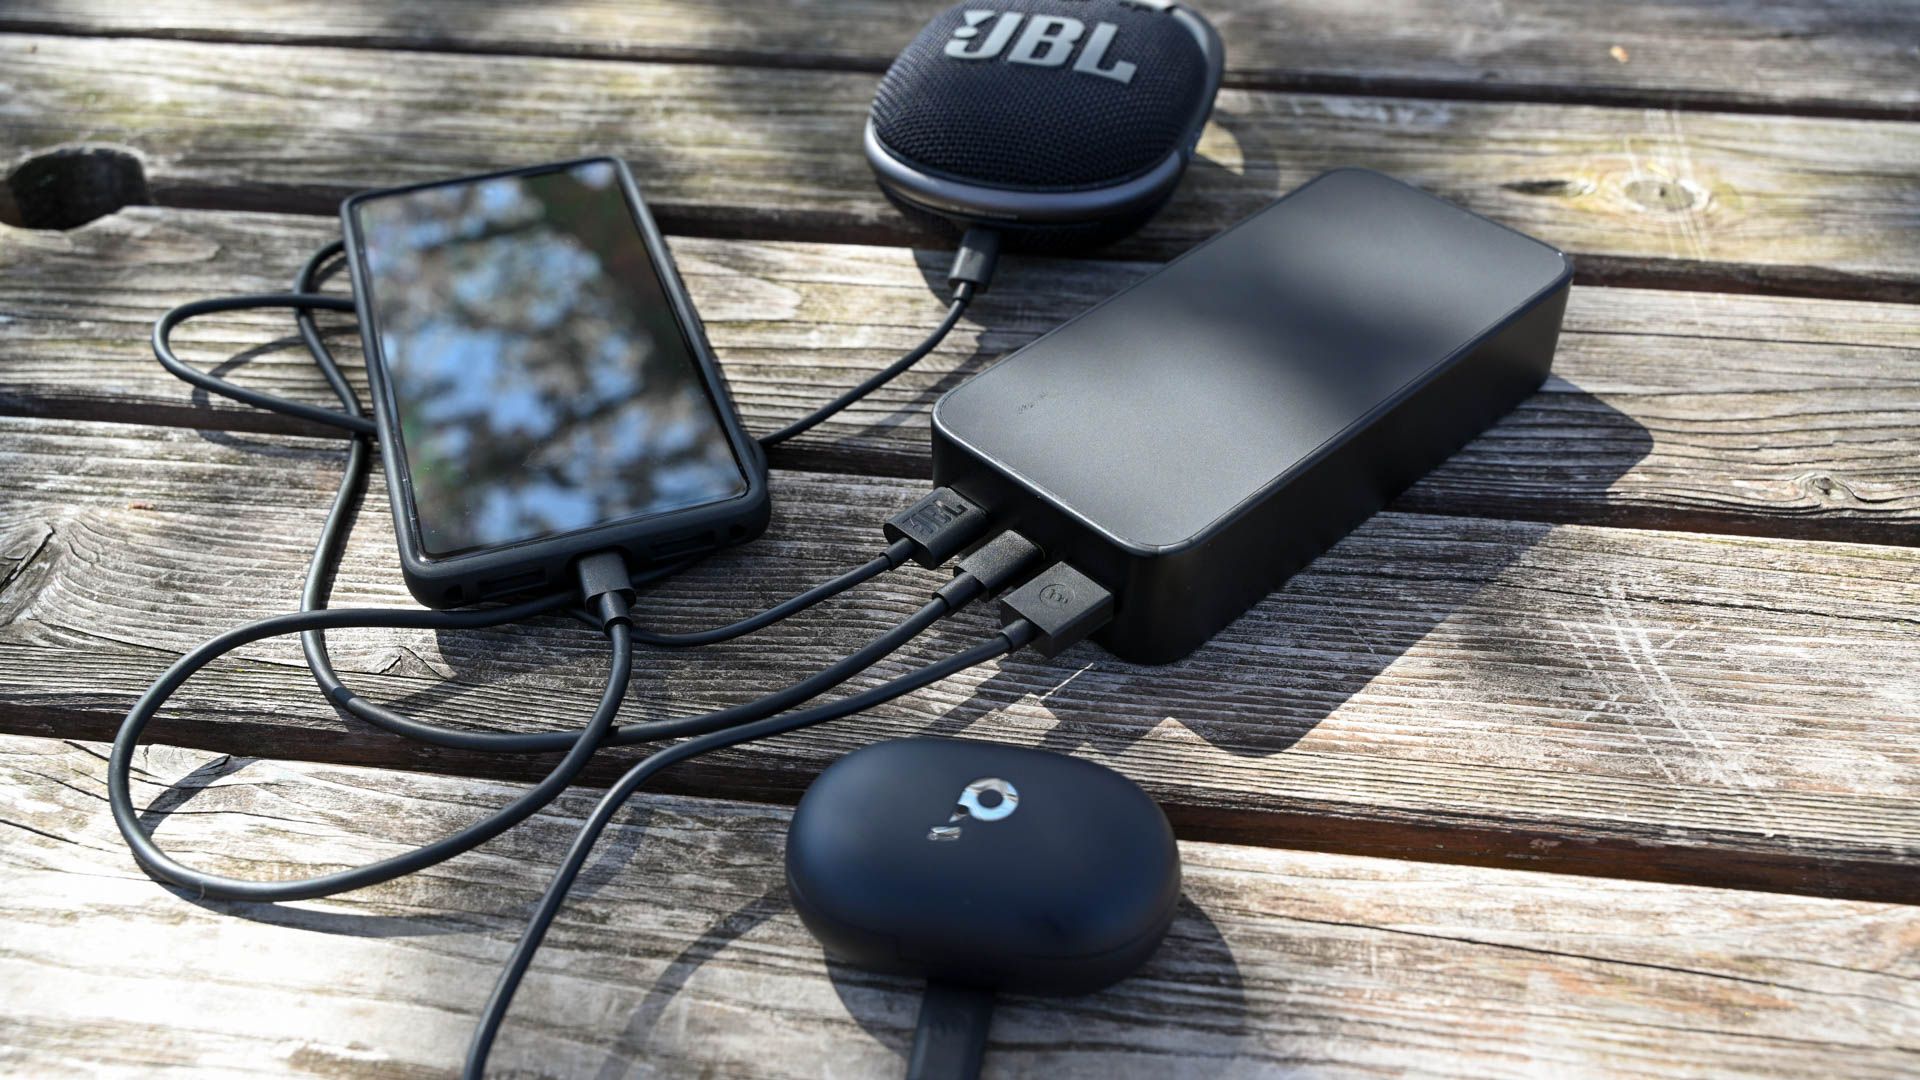 https://static1.howtogeekimages.com/wordpress/wp-content/uploads/2023/04/charging-three-devices-at-once-on-a-picnic-table-using-the-mophie-powerstation-xl-3jpg_52768852474_o.jpg